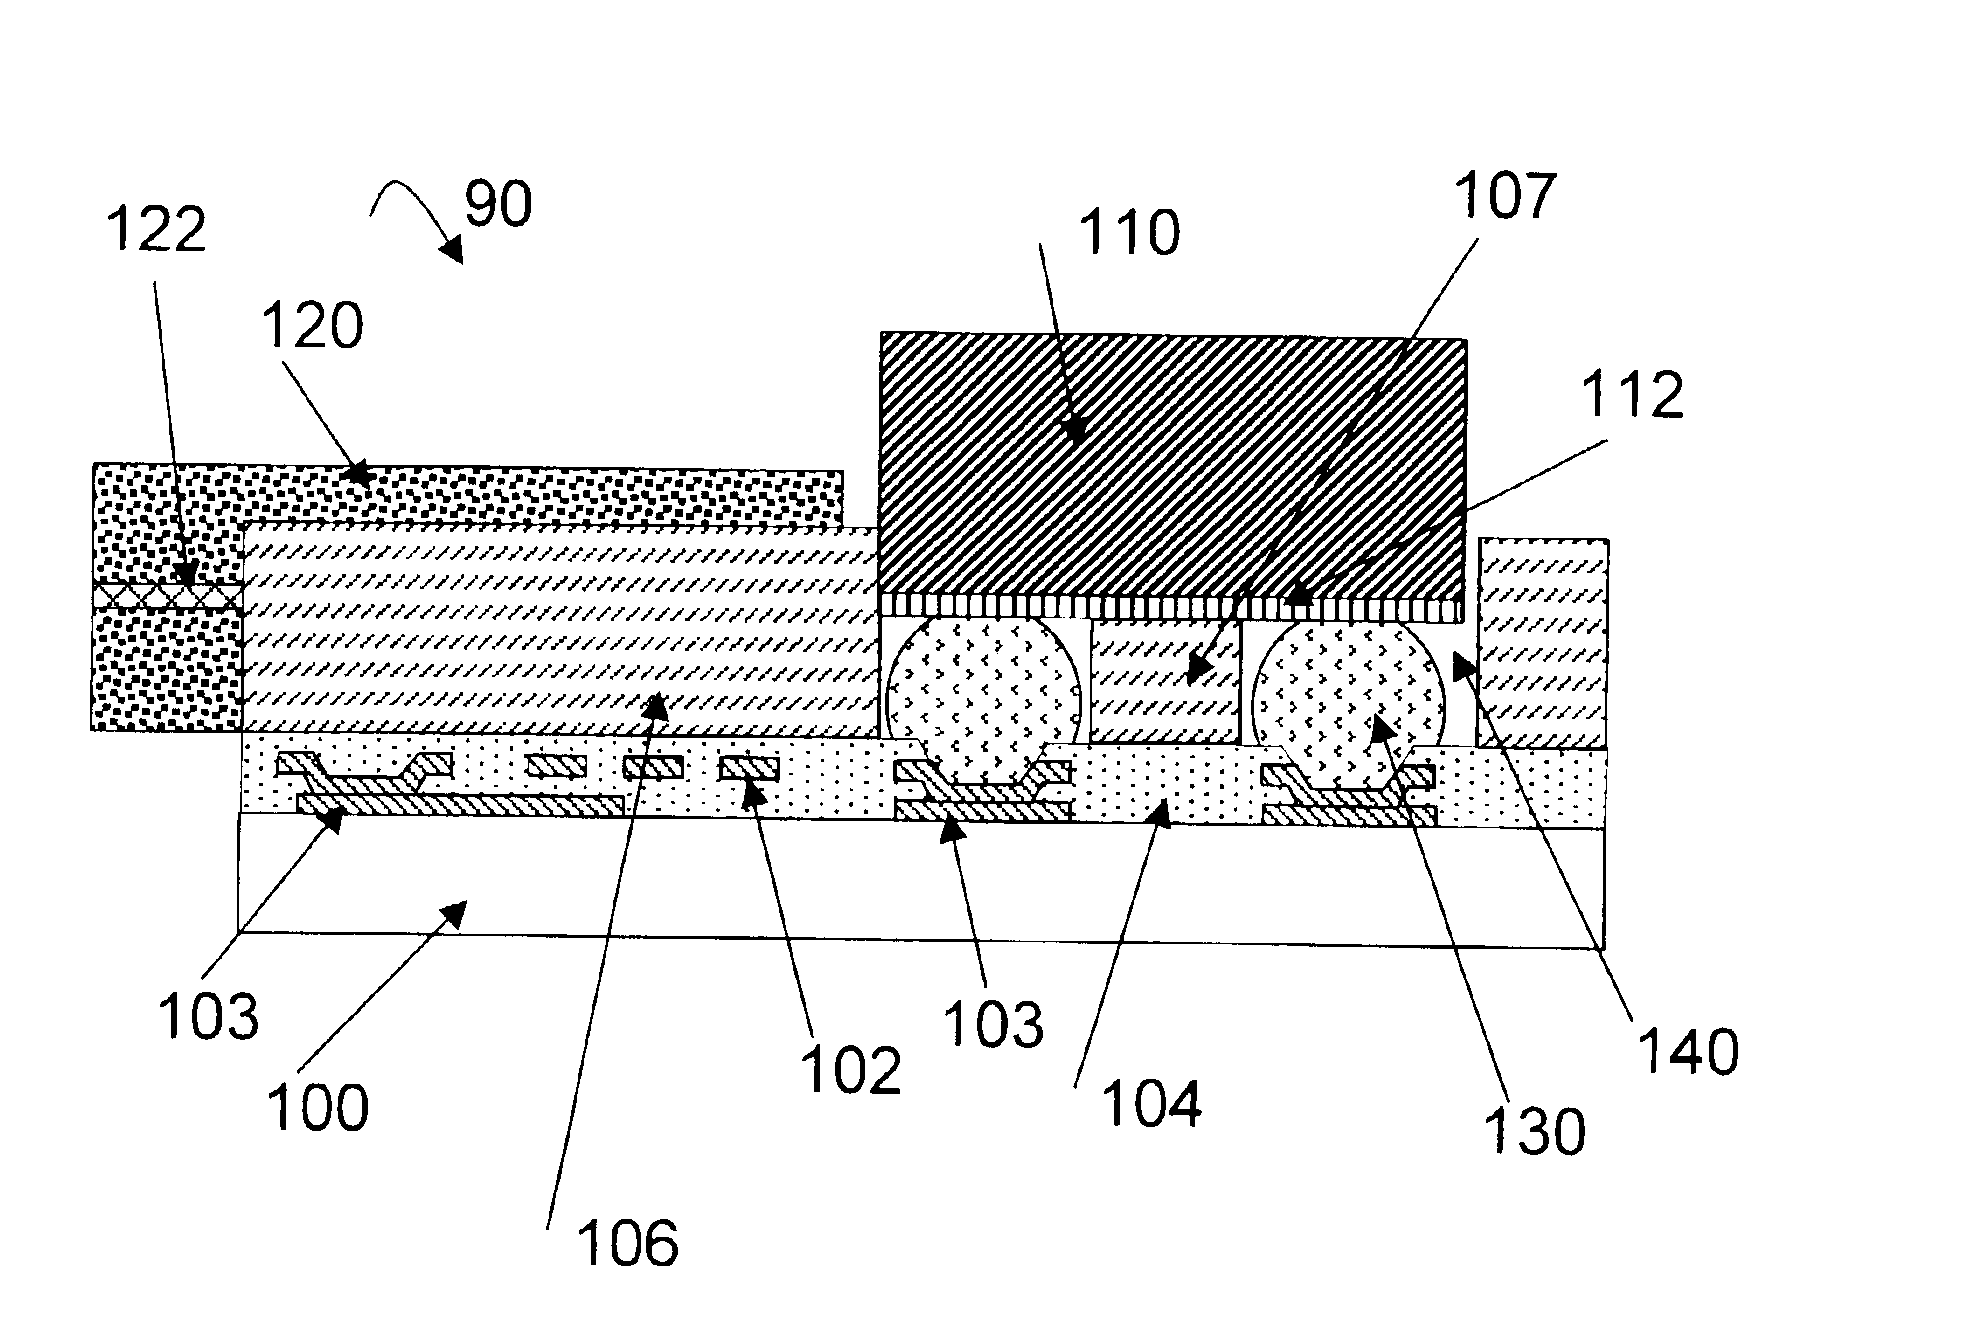 Optoelectronic assembly with embedded optical and electrical components